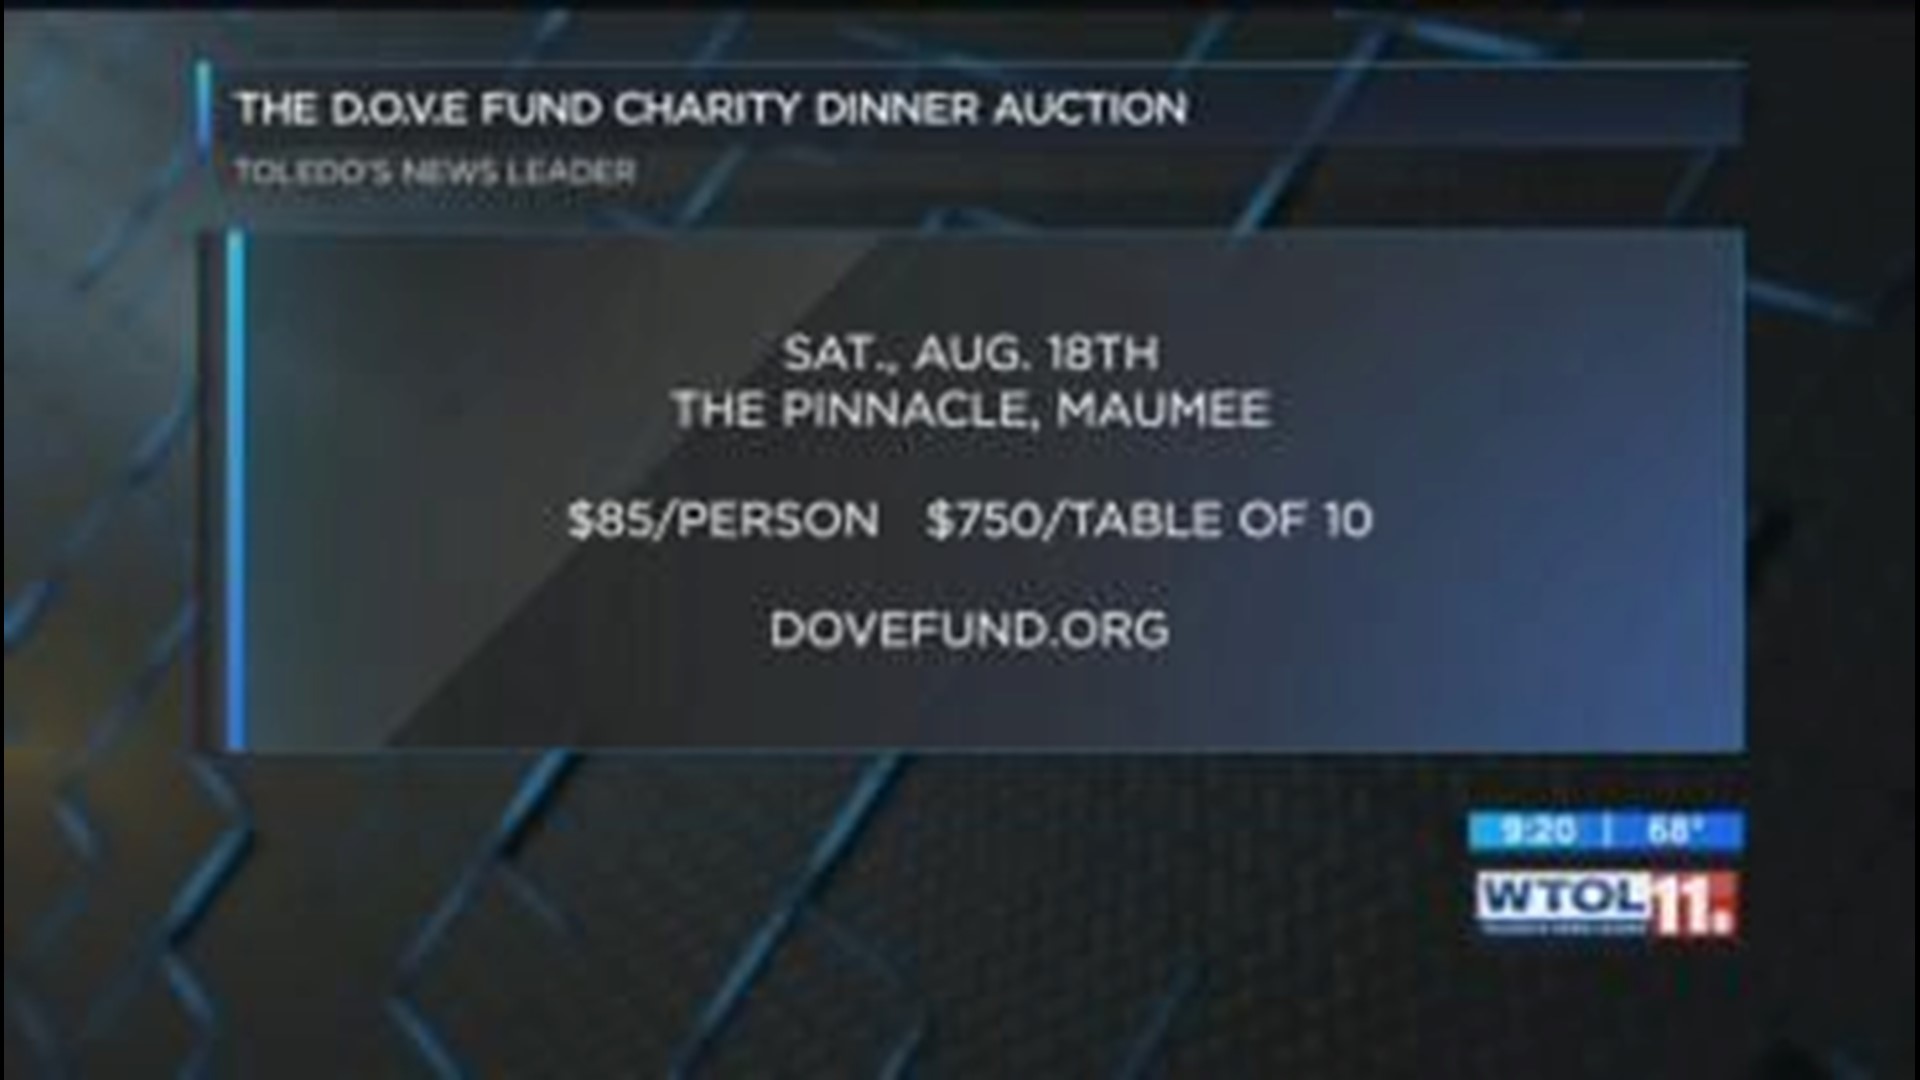 The D.O.V.E. Fund Charity Dinner Auction